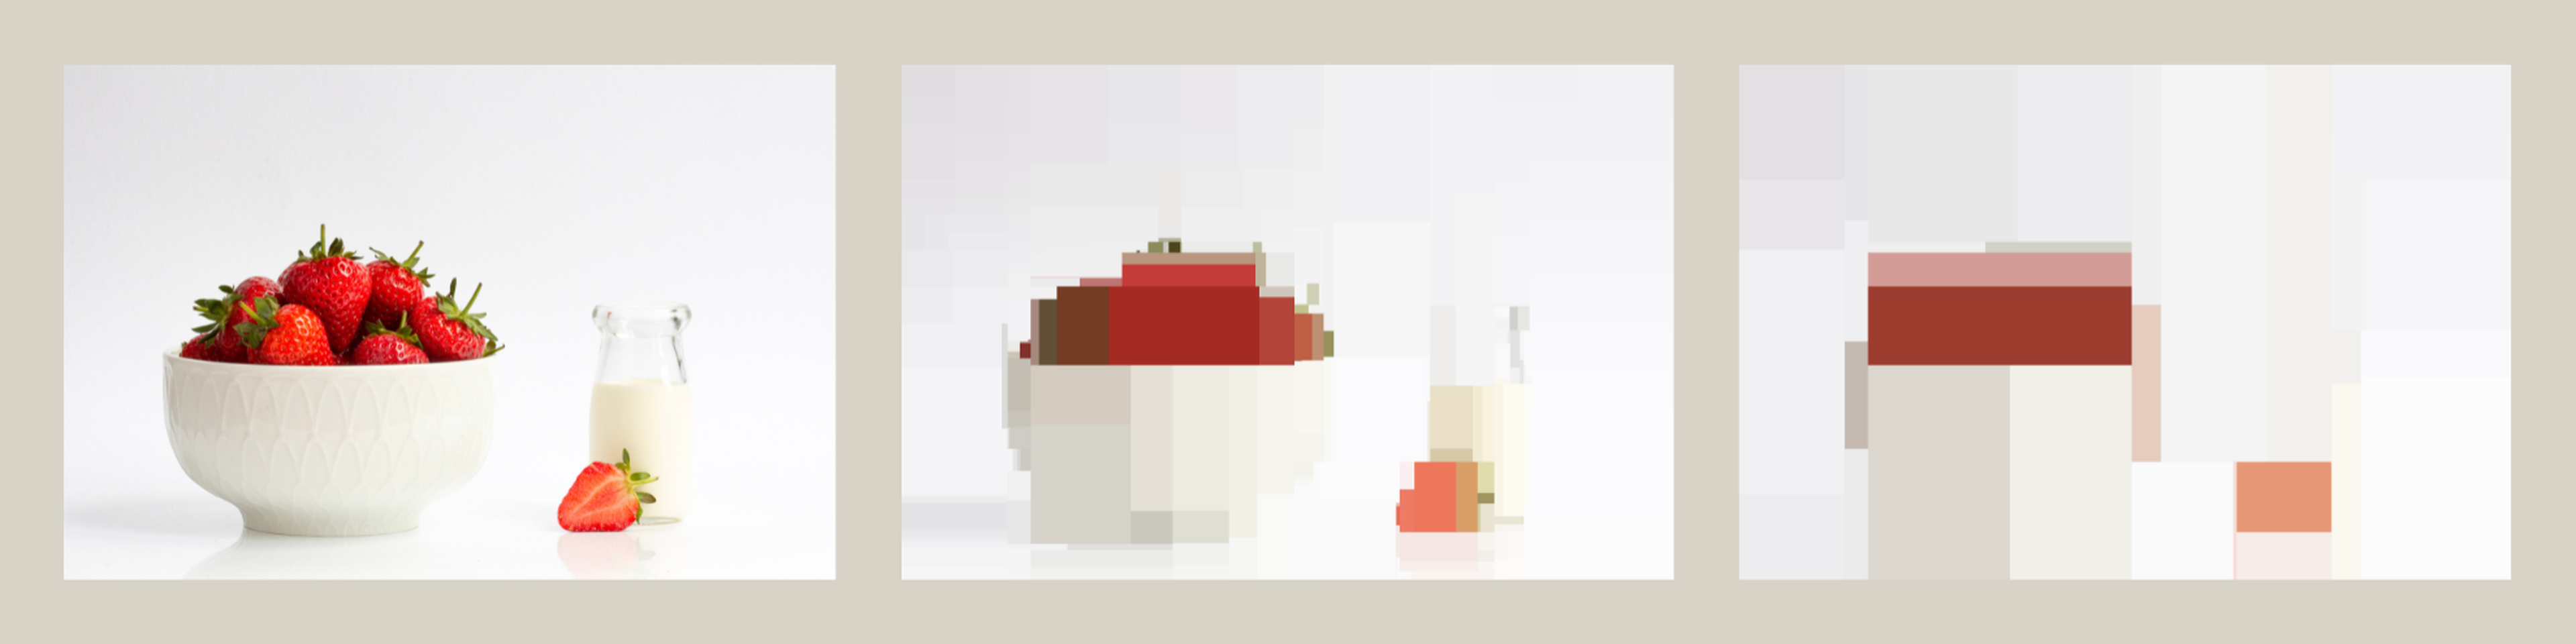 This picture is made up of 3 images in a row, on a grey background. The first picture is an original photograph of a bowl of fresh strawberries, contrasted against the white bowl they are in a small white bottle of milk. In the middle, the photograph is now broken down into blocks of colour in the shape of the original strawberries. The final picture has been broken down even more, to the extent that the large blocks of colour are now no longer recognisable as strawberries and milk.